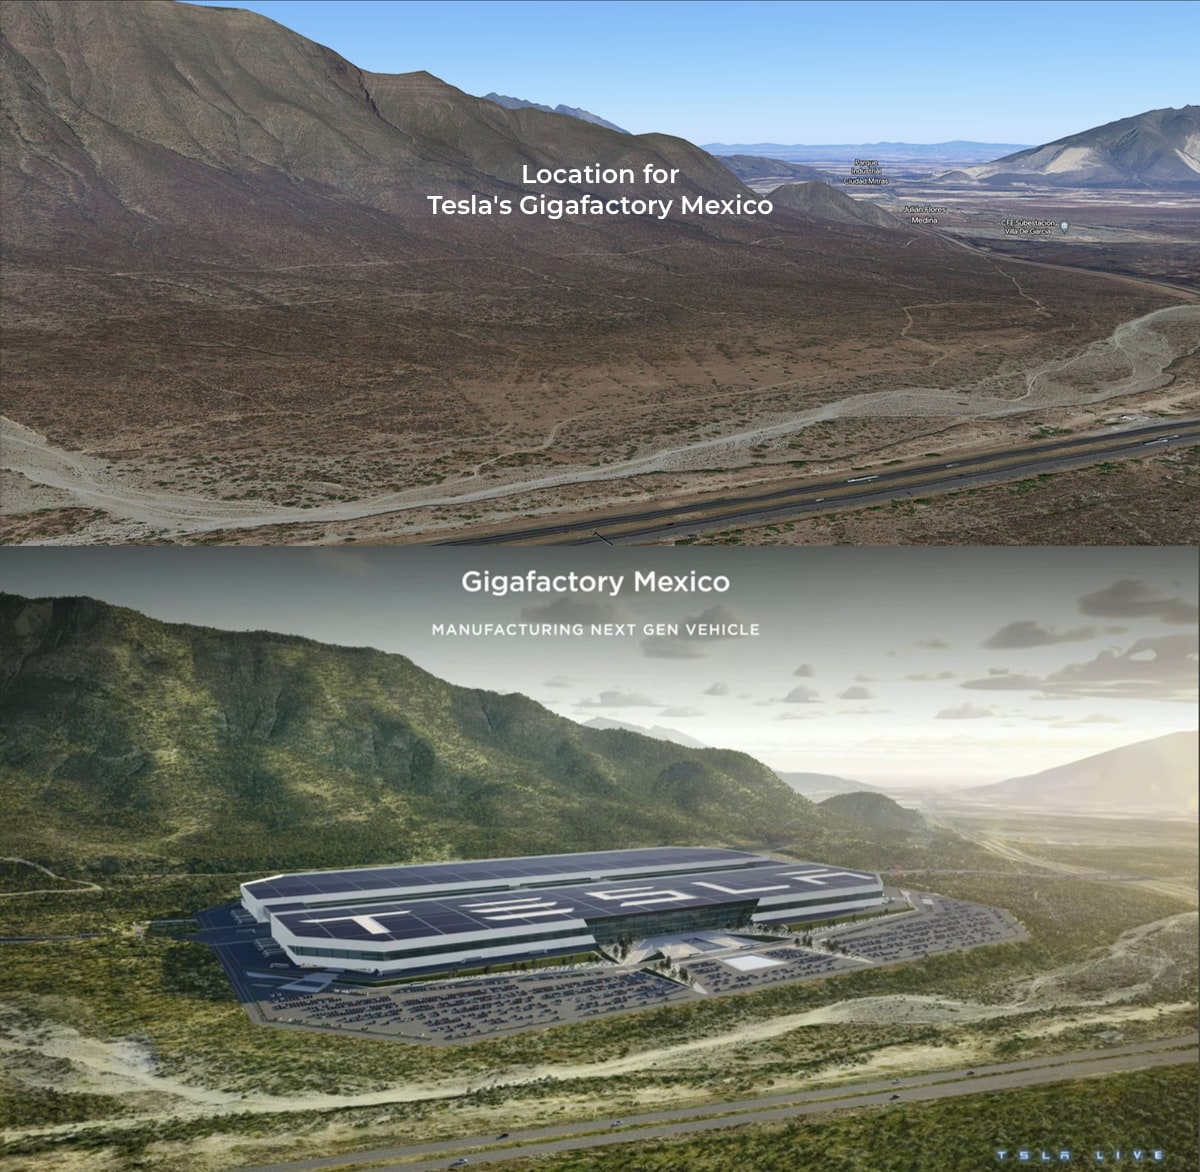 Tesla will open a new gigafactory in Mexico's northern border state of Nuevo Leon